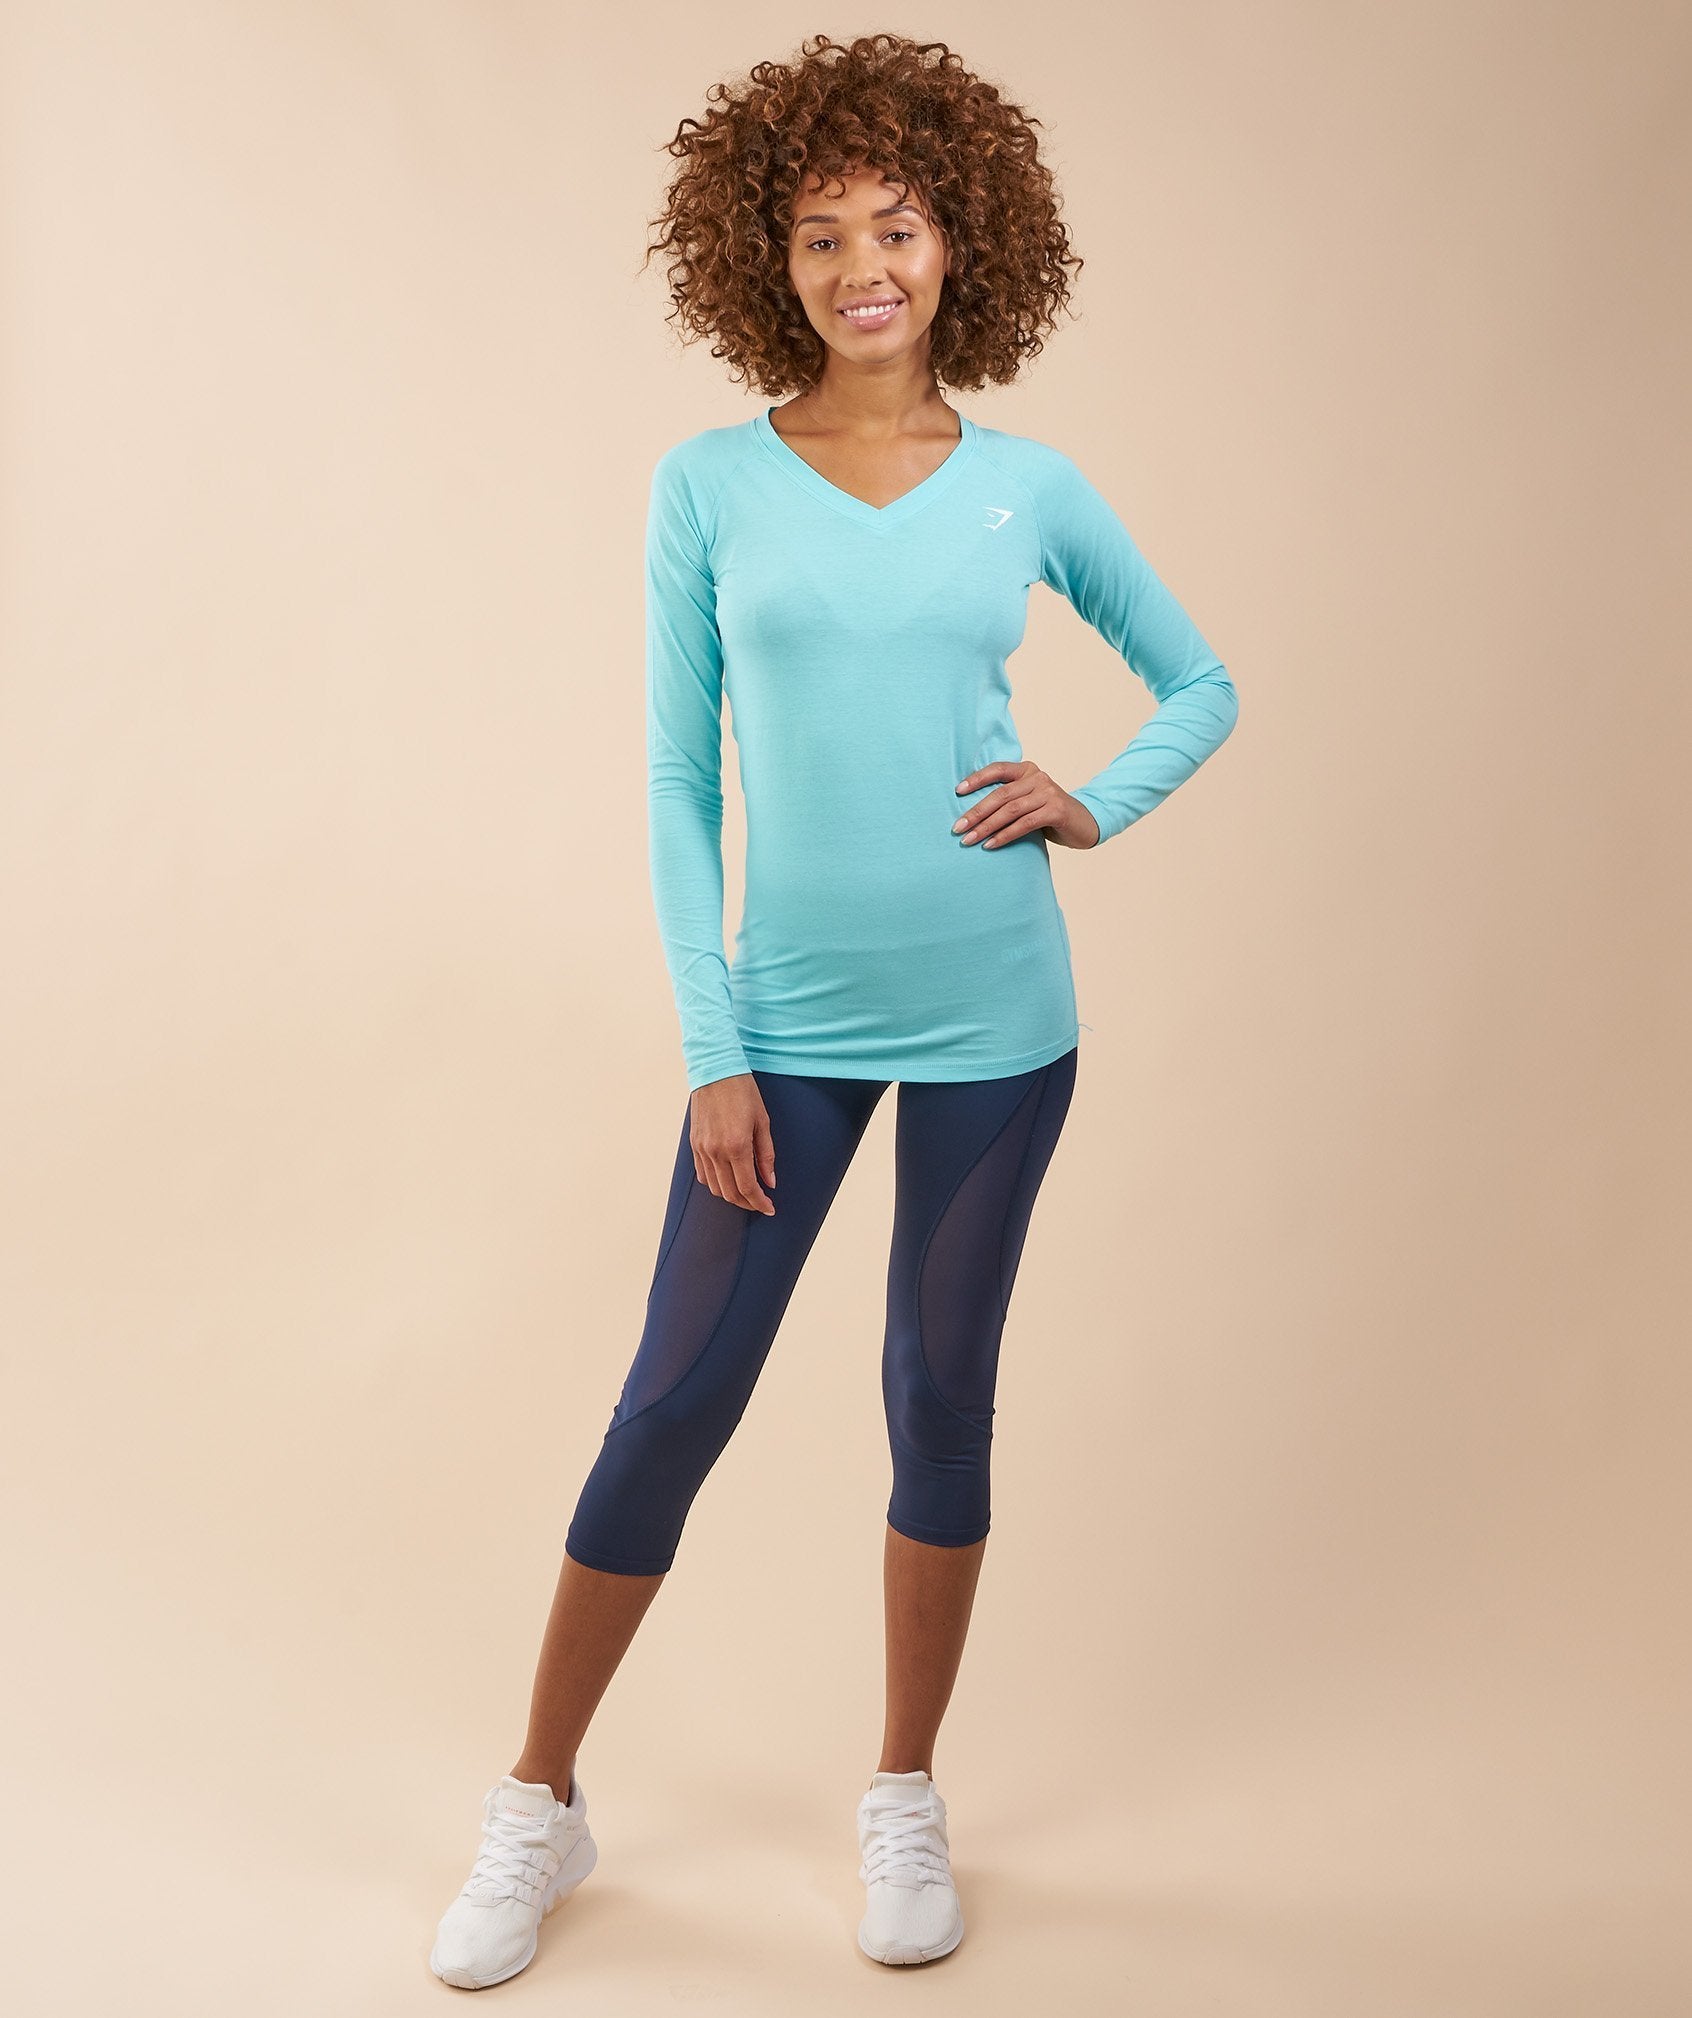 Verve Long Sleeve T-Shirt in Marine Blue - view 1